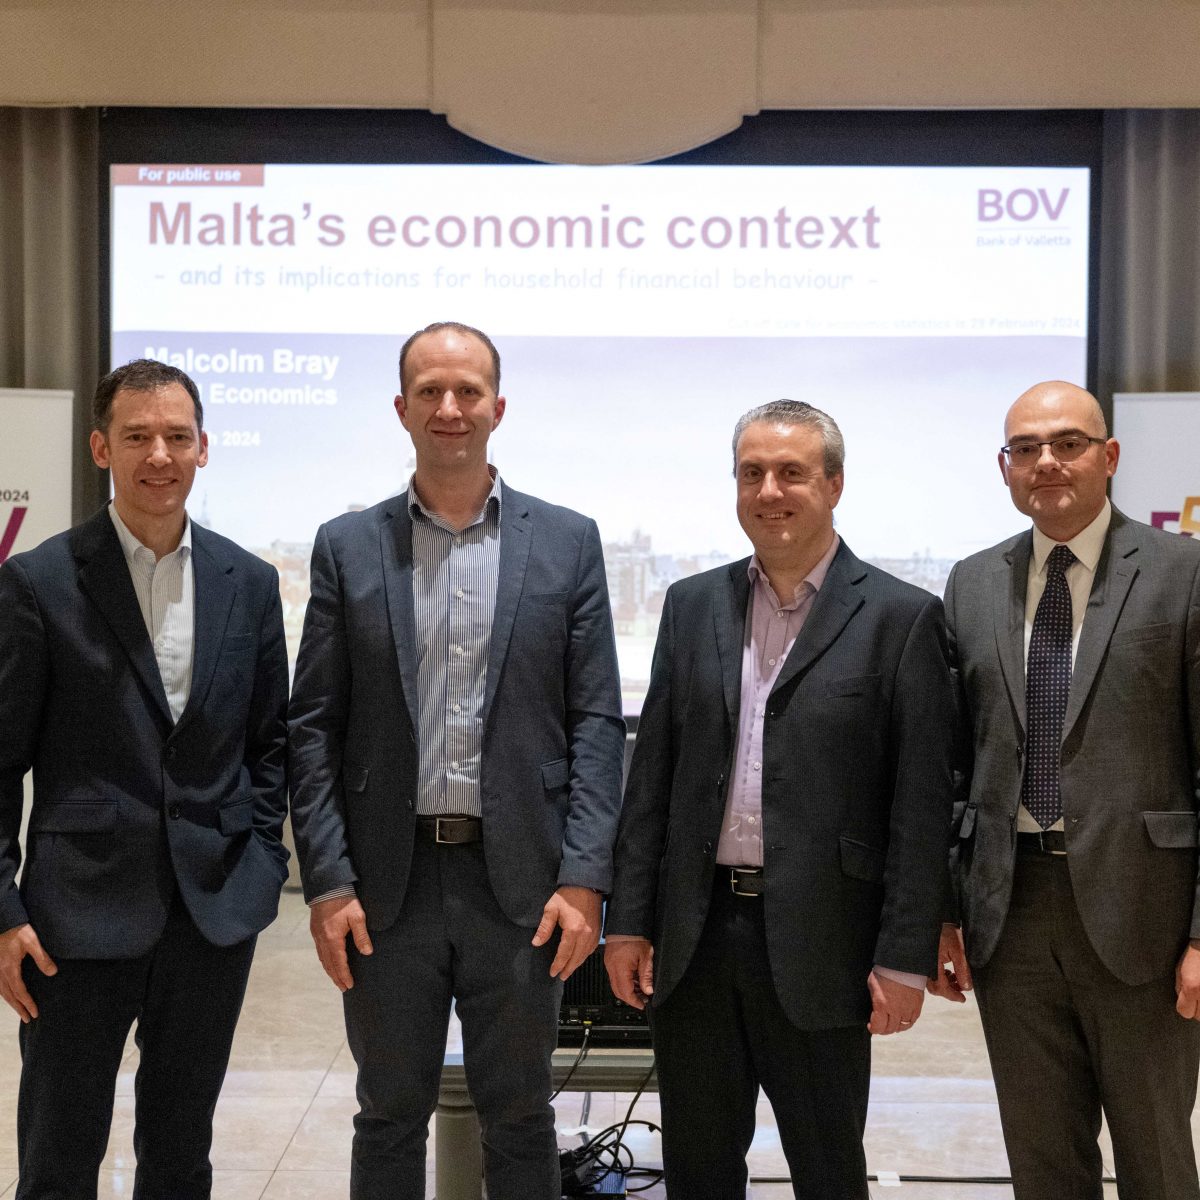 BOV EXPERTS DISCUSS ECONOMY AND INVESTMENT BASICS WITH RETAIL CLIENTS